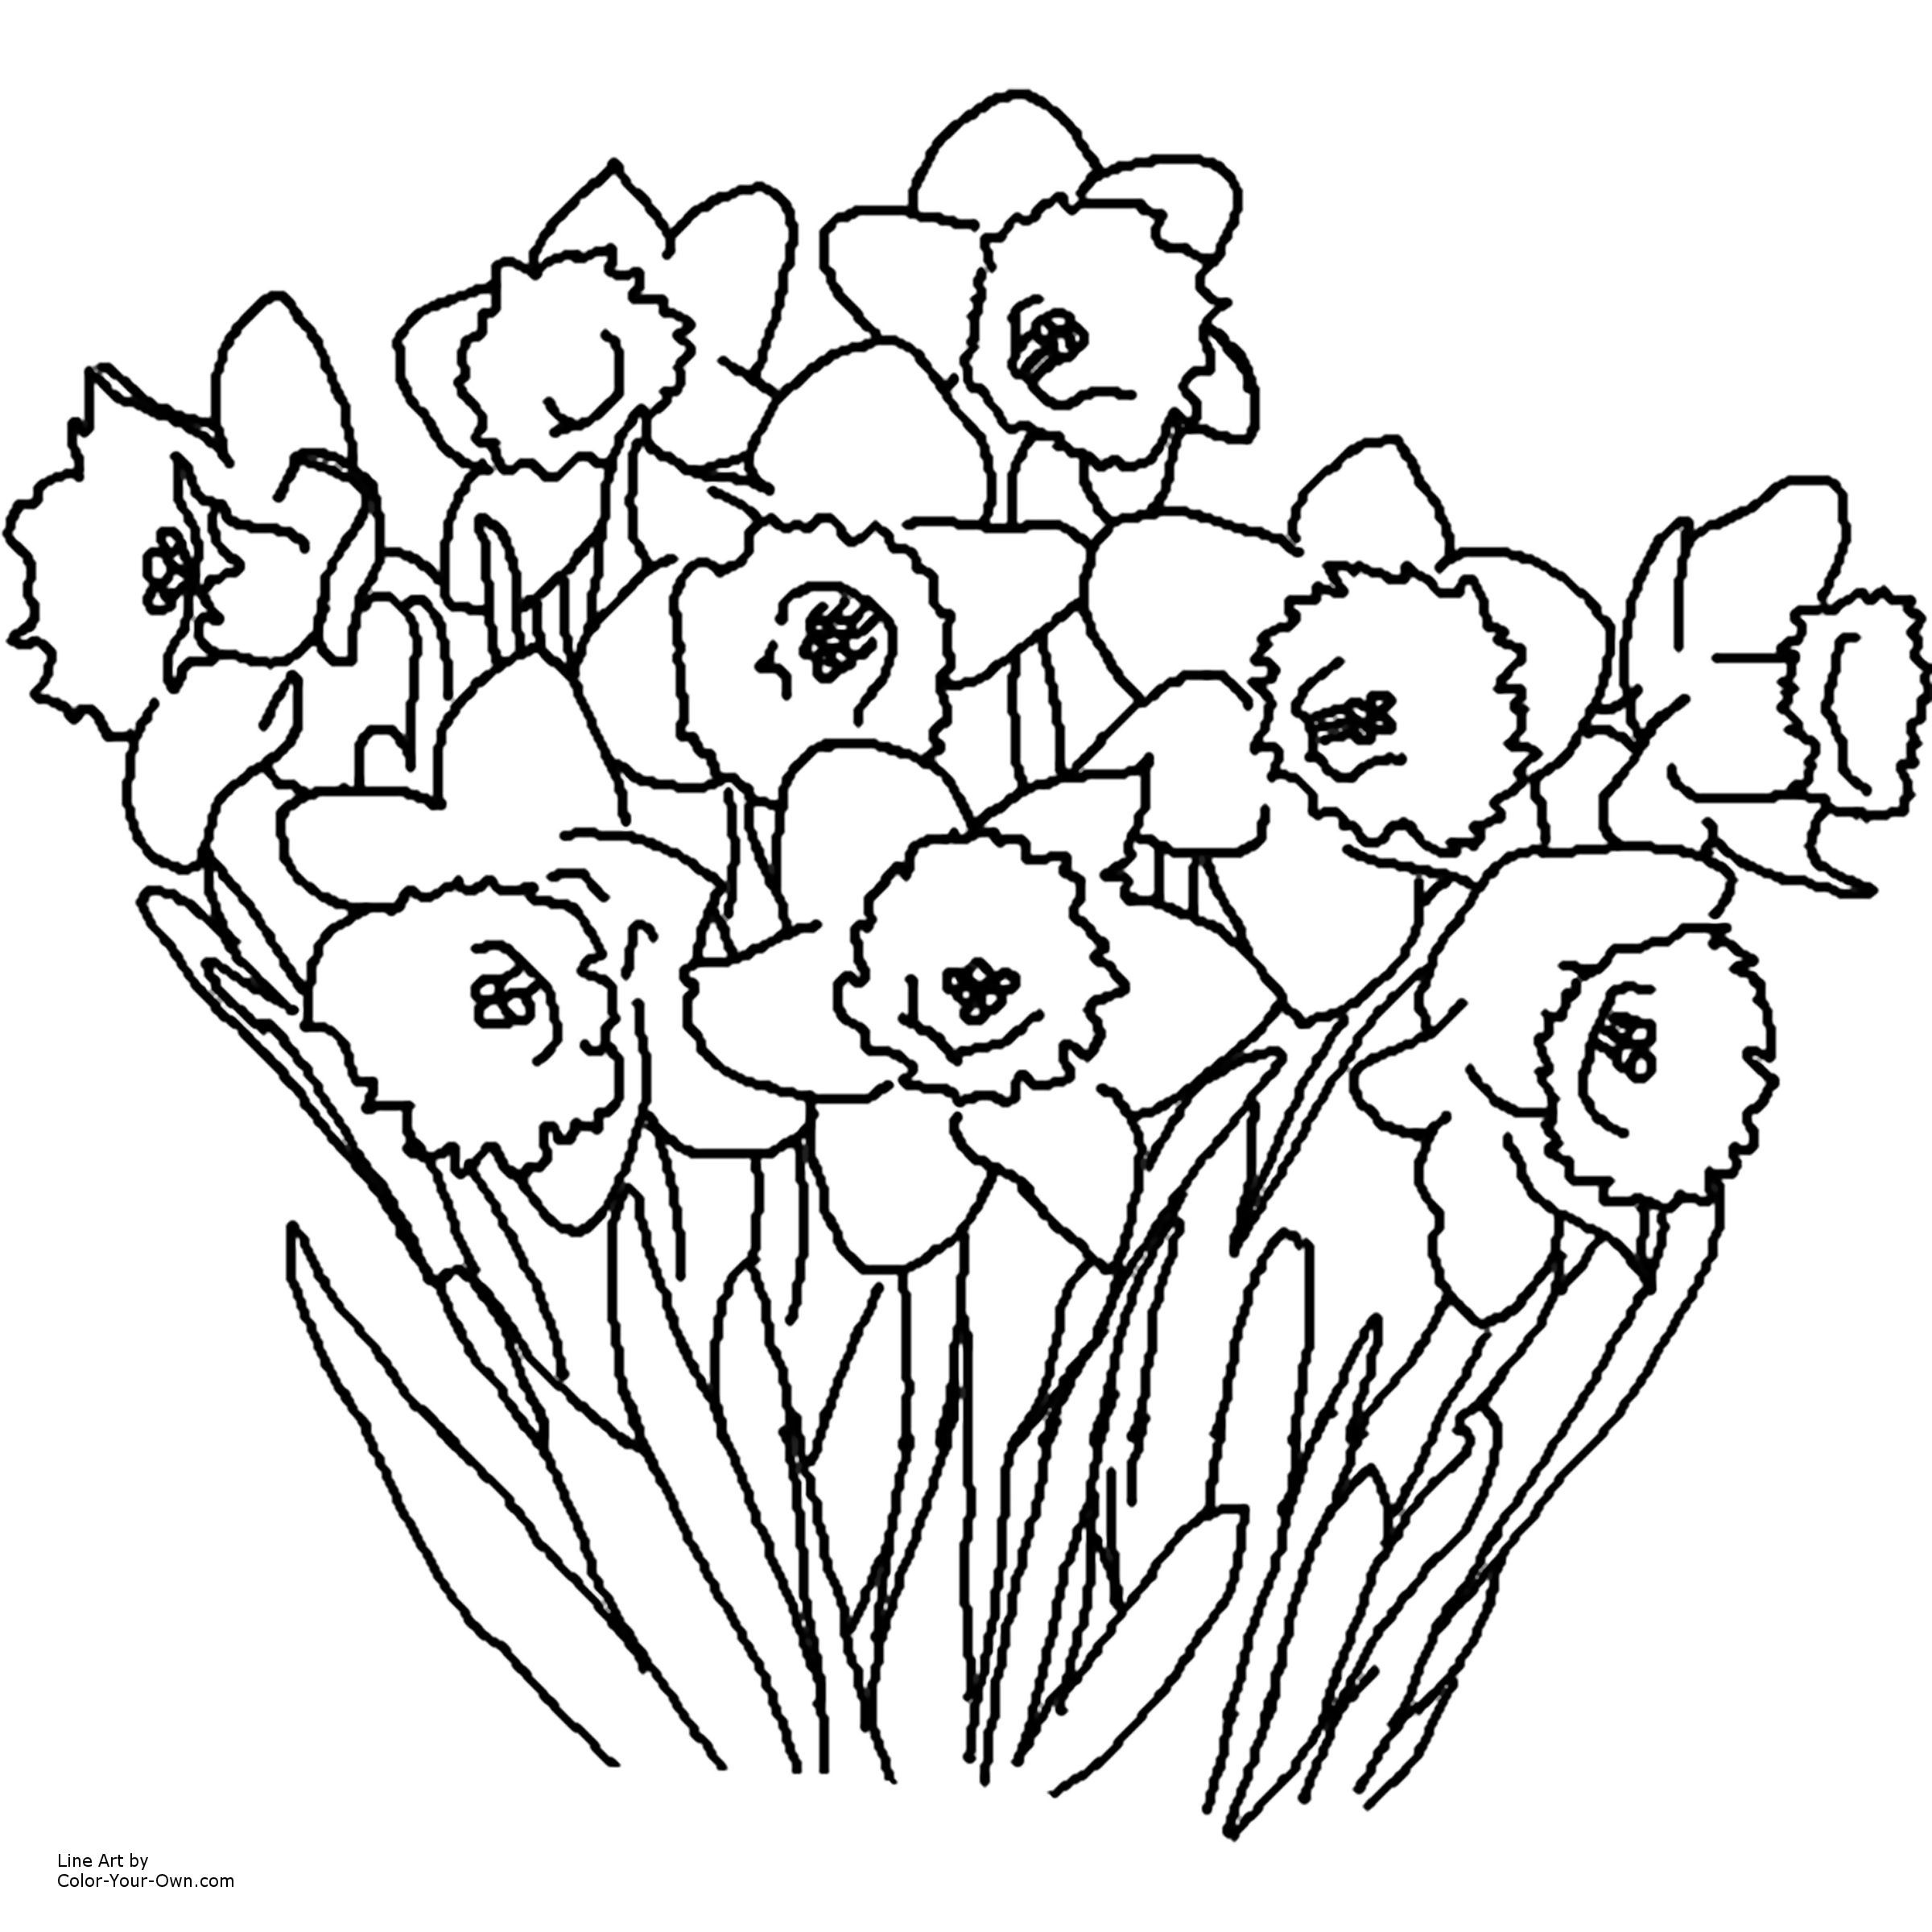 29 Unique Pictures Of Roses In A Vase 2024 free download pictures of roses in a vase of springtime coloring pages fresh new cool vases flower vase coloring in new cool vases flower vase coloring page pages flowers in a top i 0d